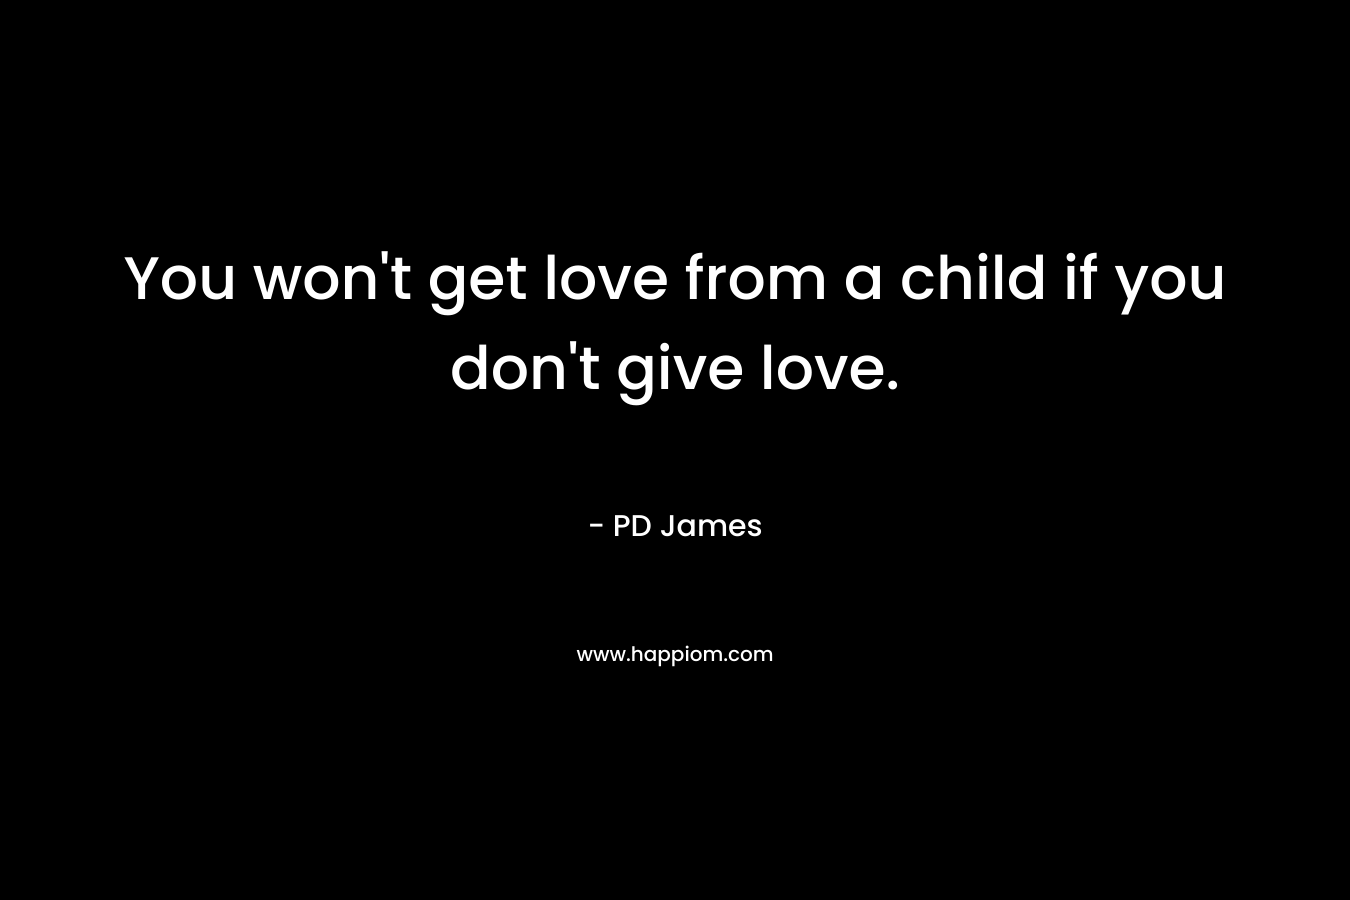 You won’t get love from a child if you don’t give love. – PD James